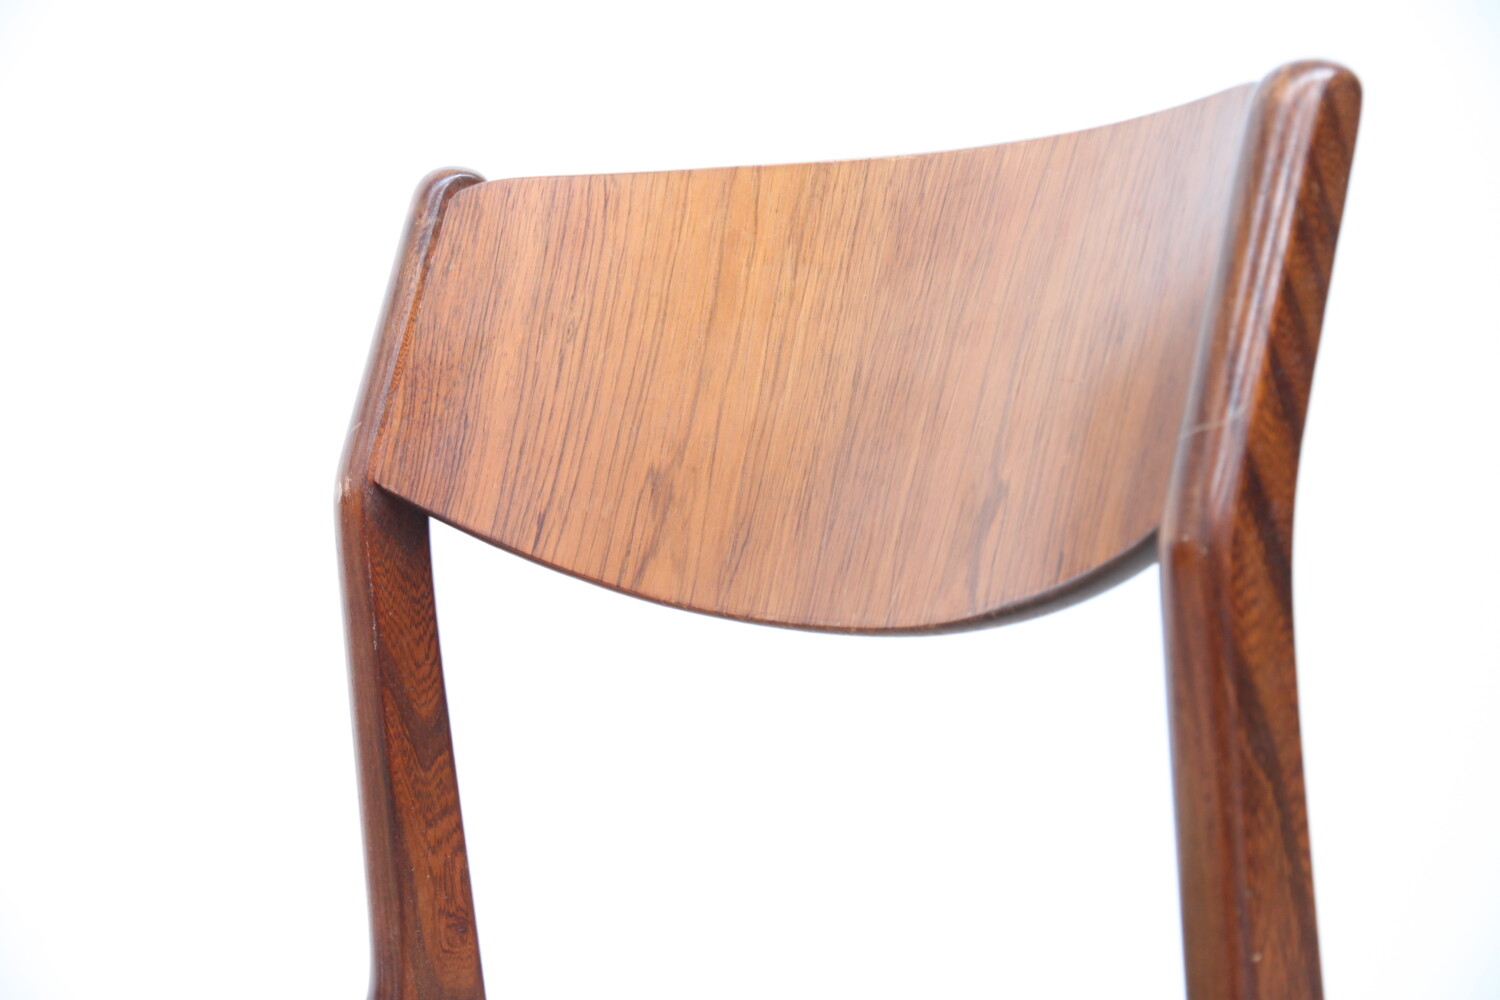 Dining Chairs By Henning kjaernulf